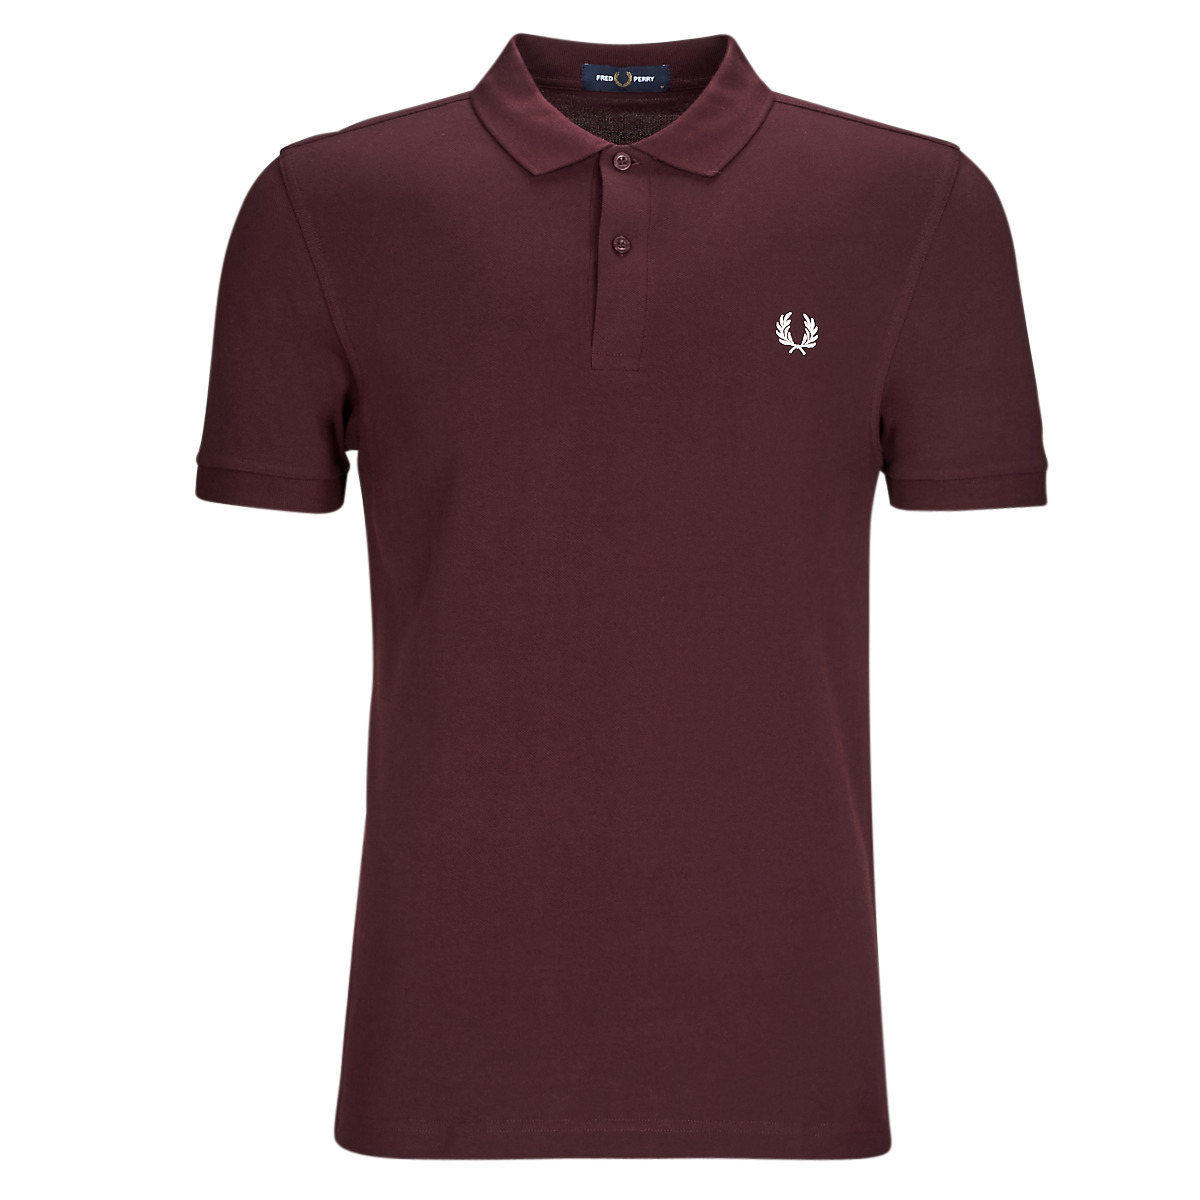 fred perry  plain fred perry shirt  men's polo shirt in bordeaux